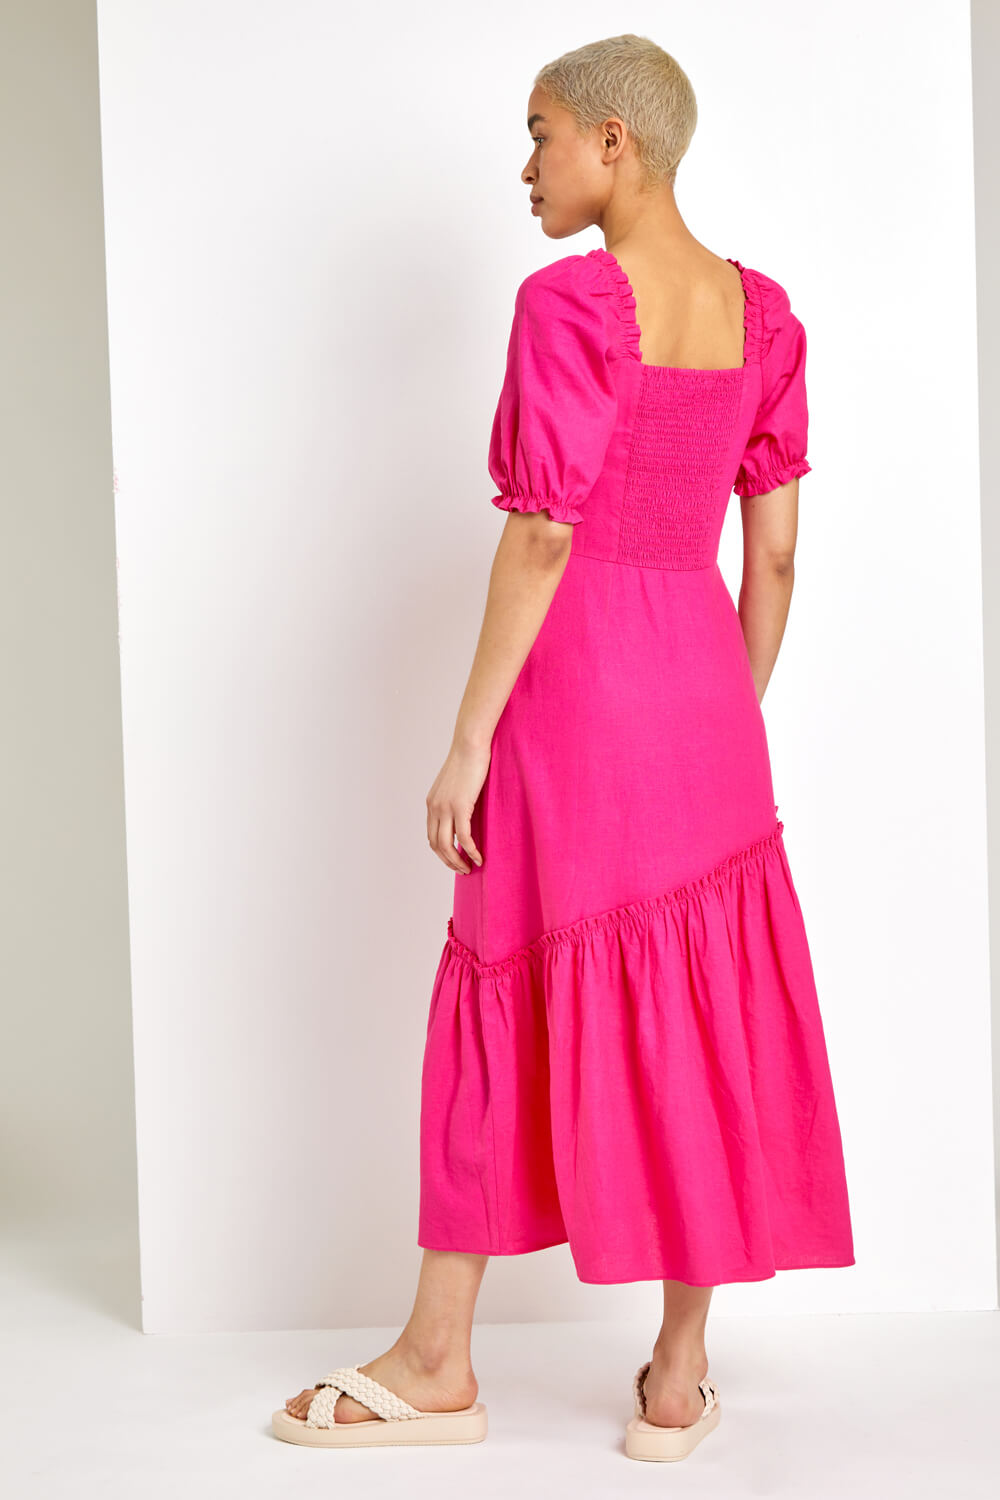 PINK Square Neck Asymmetric Tiered Midi Dress, Image 2 of 4